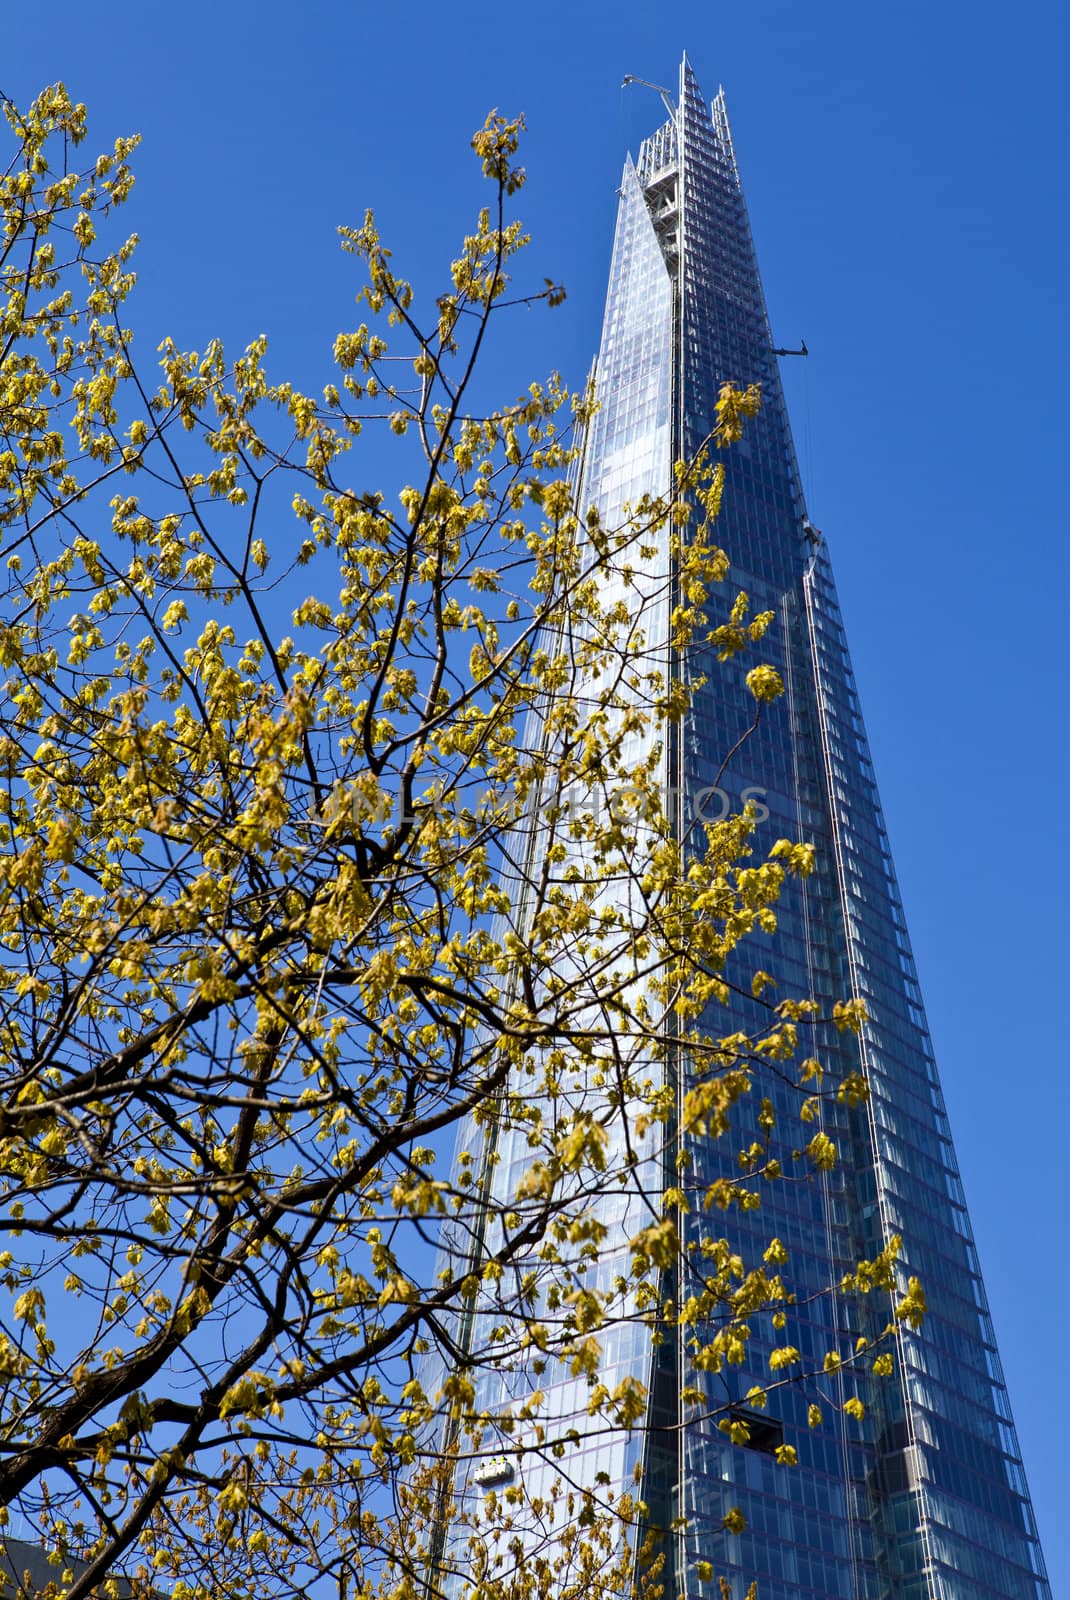 Looking up at the Shard in London.